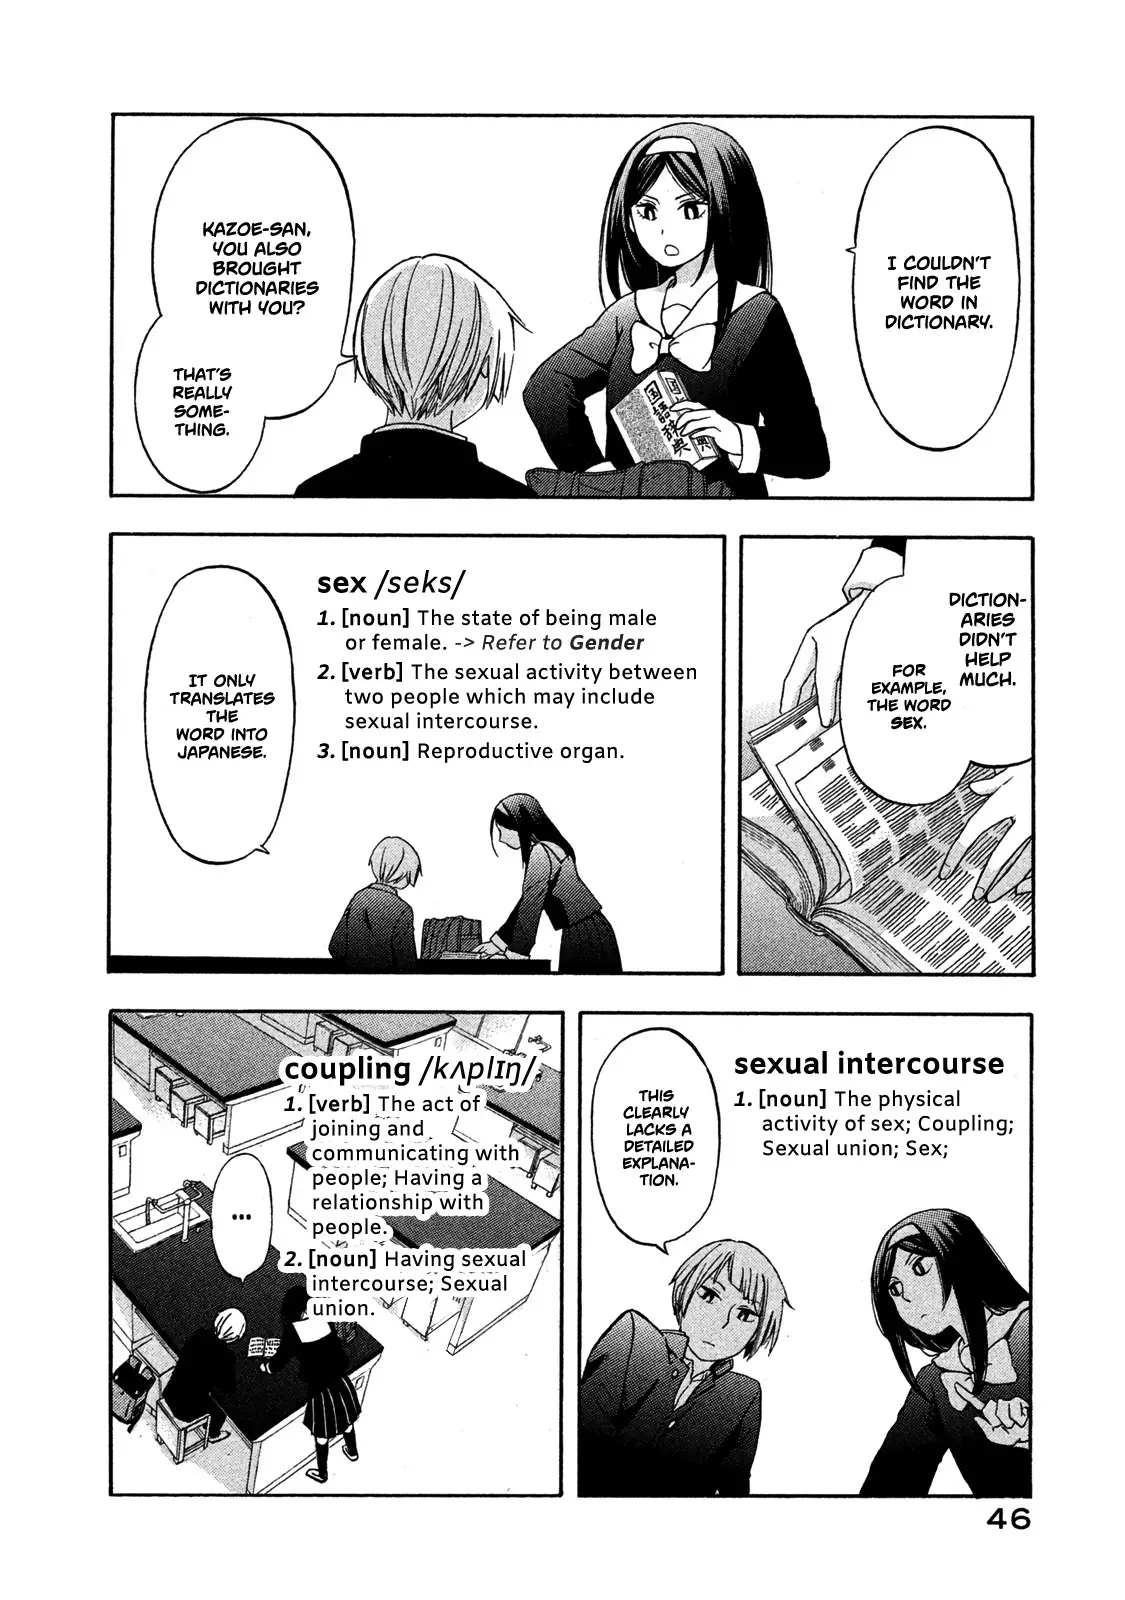 Hanazono And Kazoe's Bizzare After School Rendezvous - 3 page 6-10f551a6